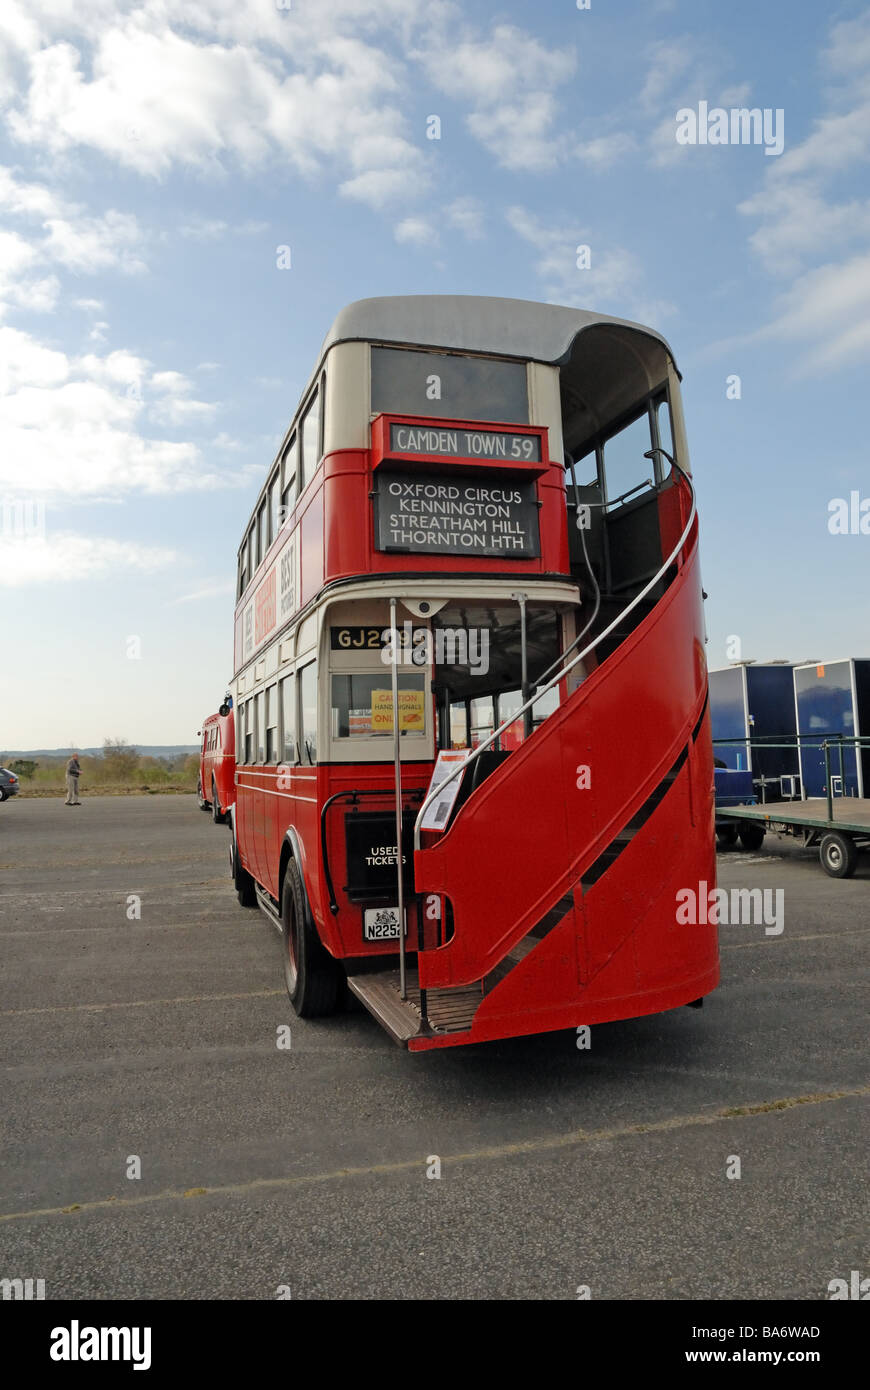 Rear View of GJ 2098 a ST922 1930 2ST7 AEC Regent Tilling H27 25RO bus with an open stair 52 seat body presented in 1930s LT Stock Photo